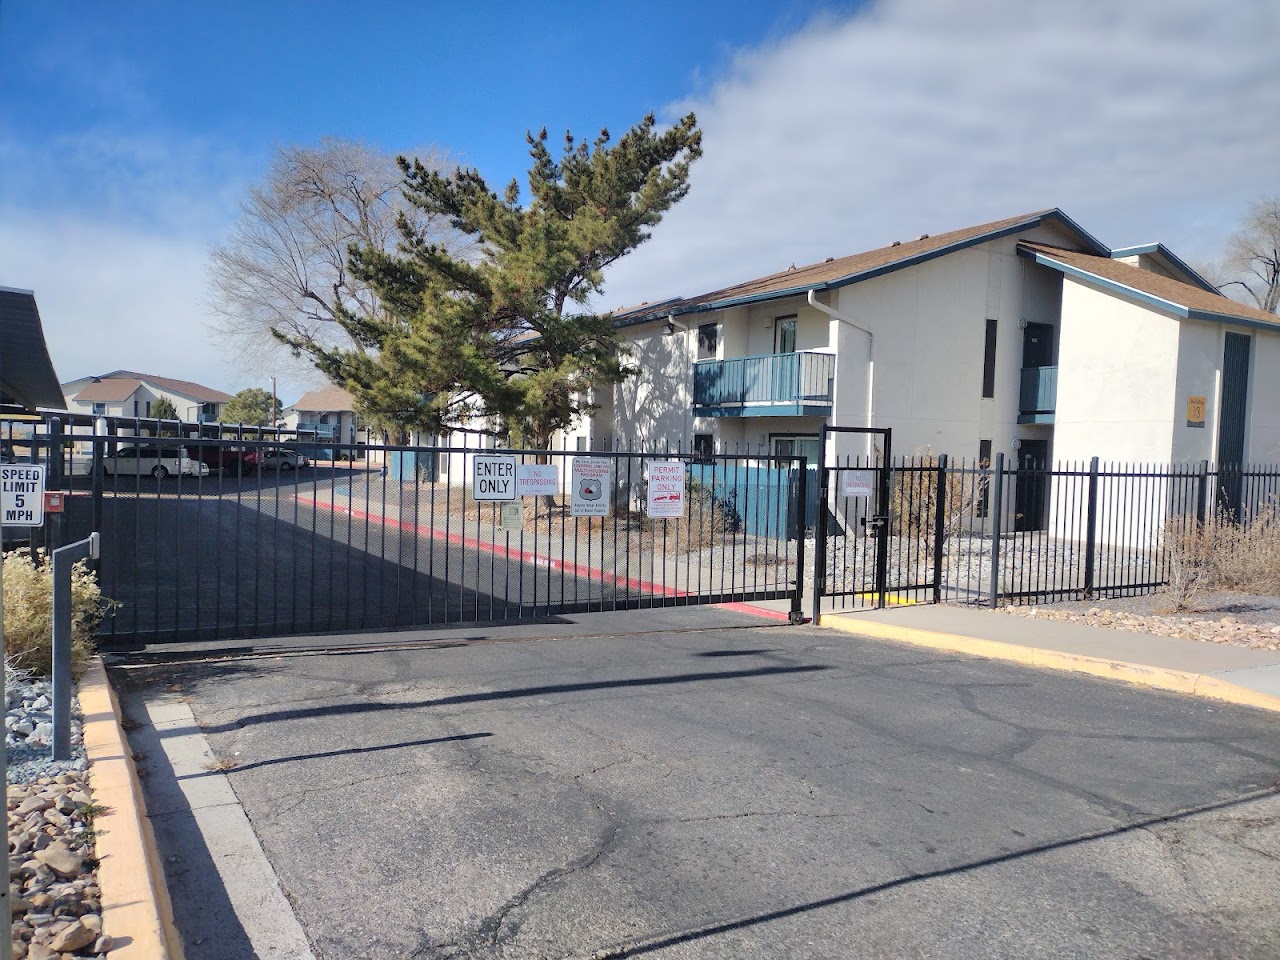 Photo of LAFAYETTE SQUARE. Affordable housing located at 3901 LAFAYETTE DR NE ALBUQUERQUE, NM 87107